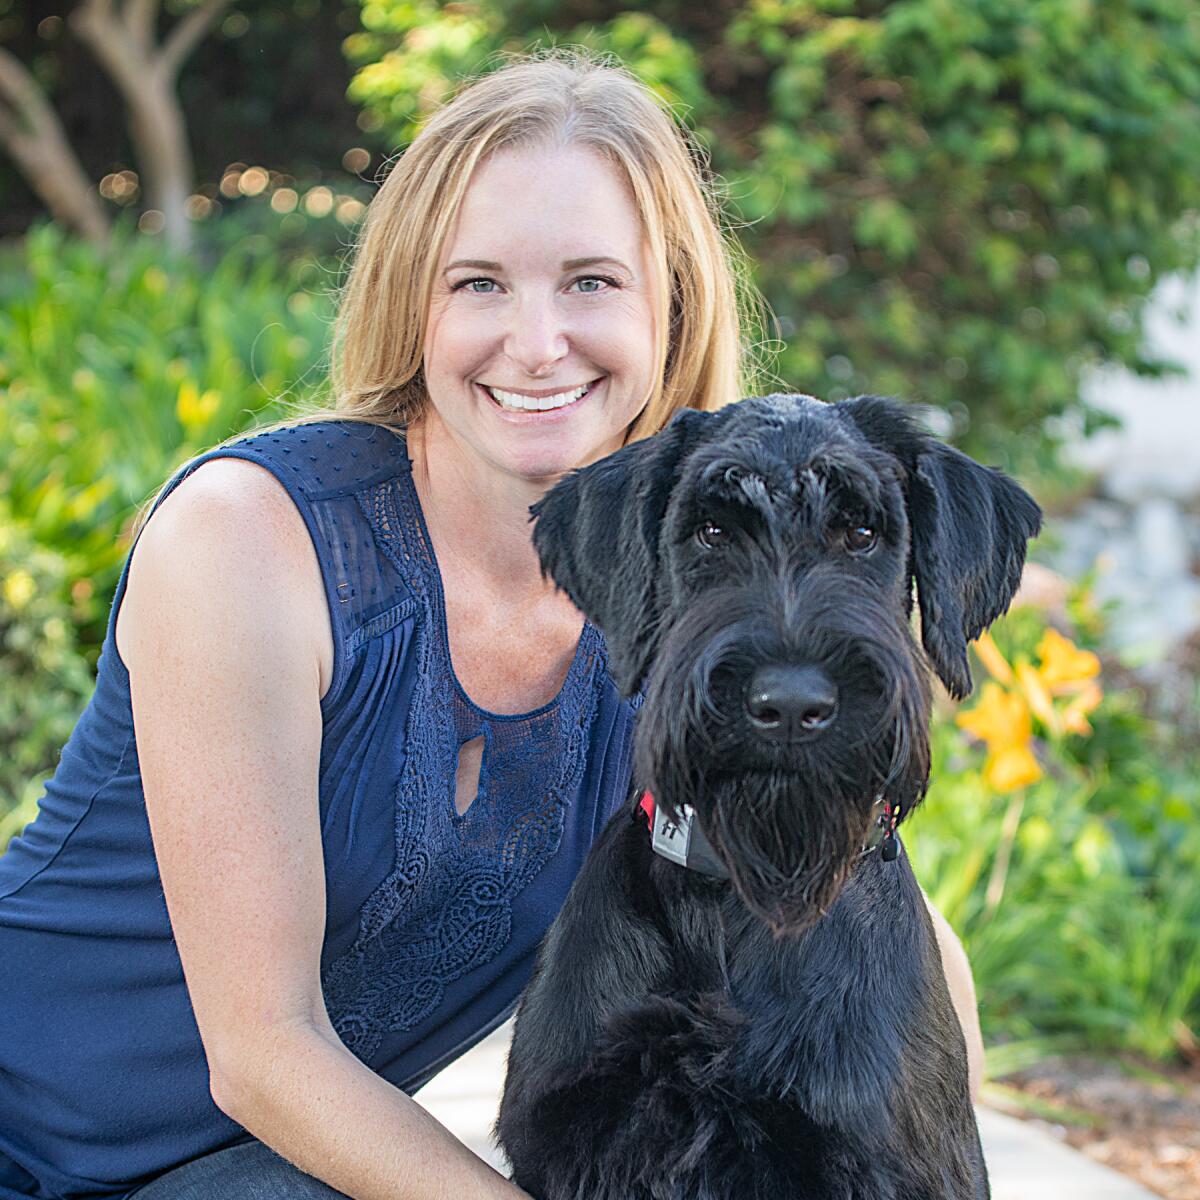 Author Jacqueline Johnson will discuss her book “Elinor McGrath, Pet Doctor” at the La Jolla/Riford Library.